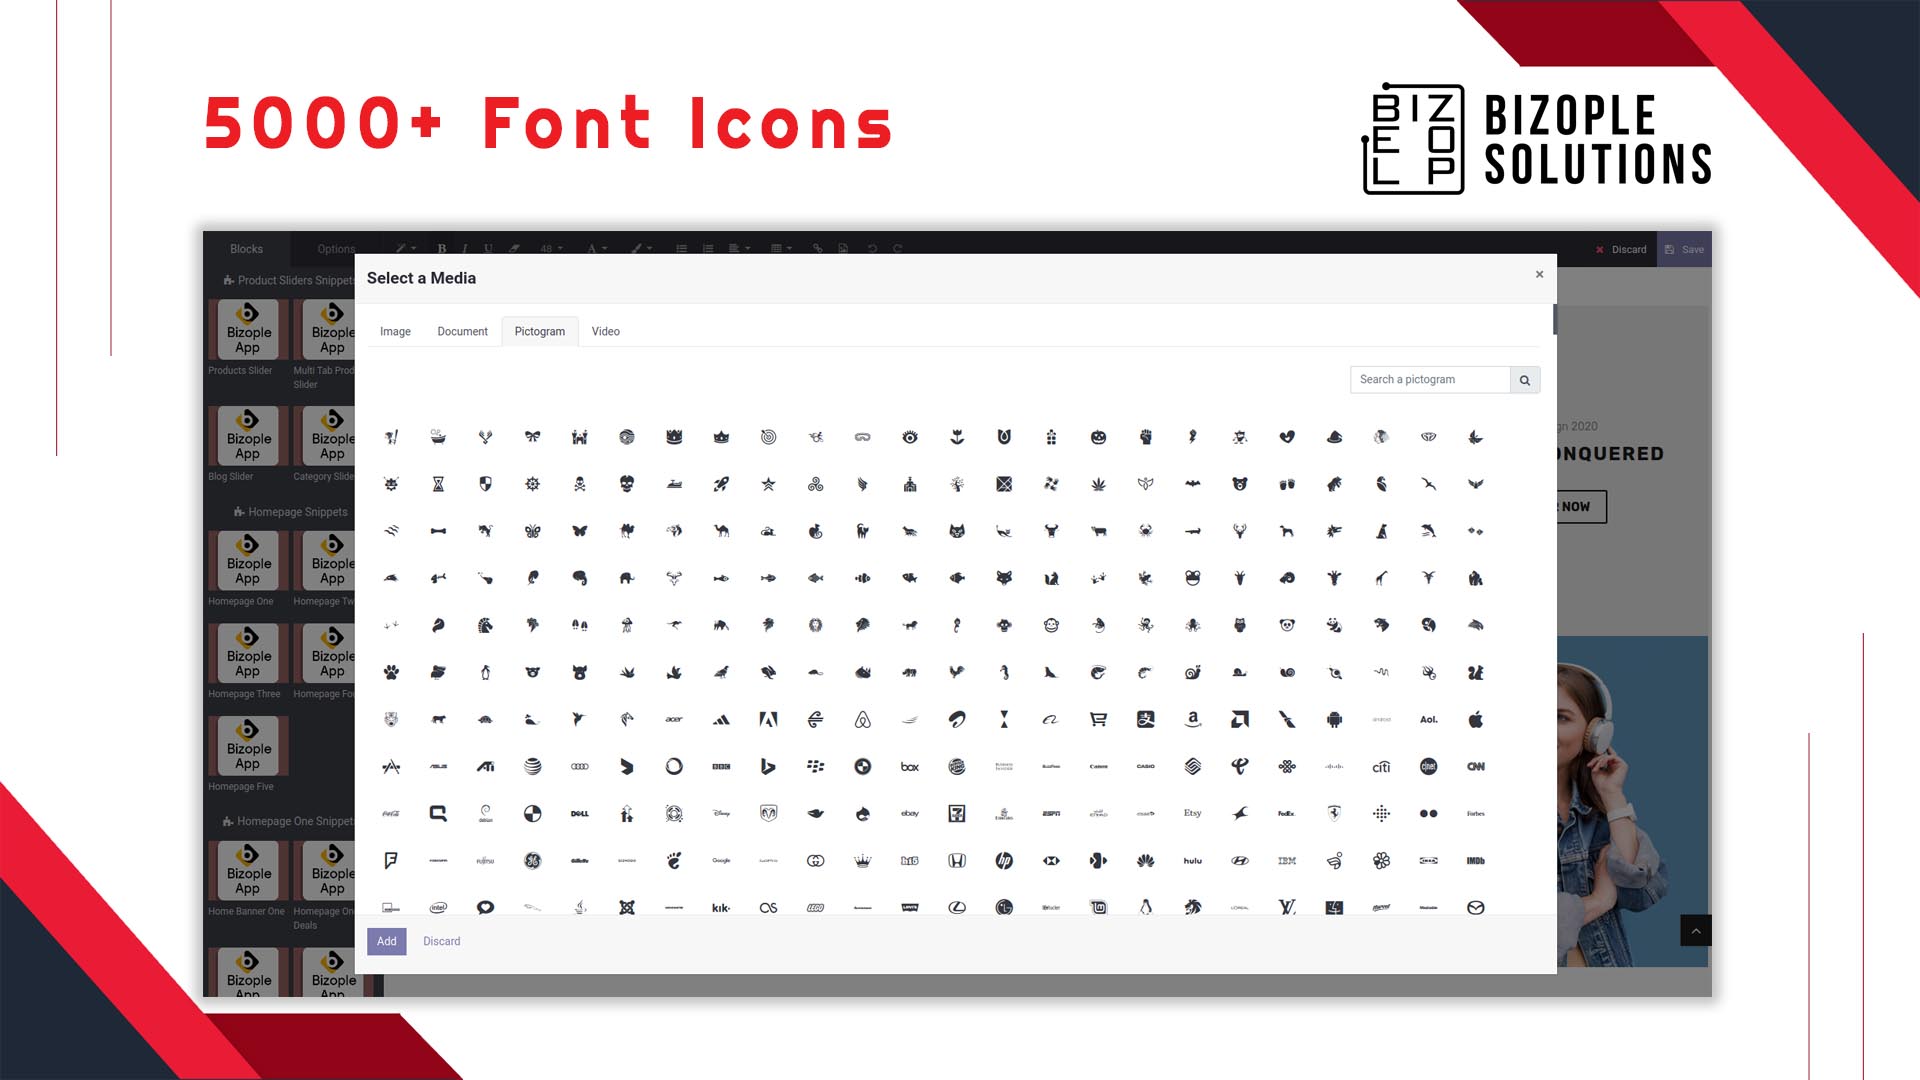 5000+ Font Icons